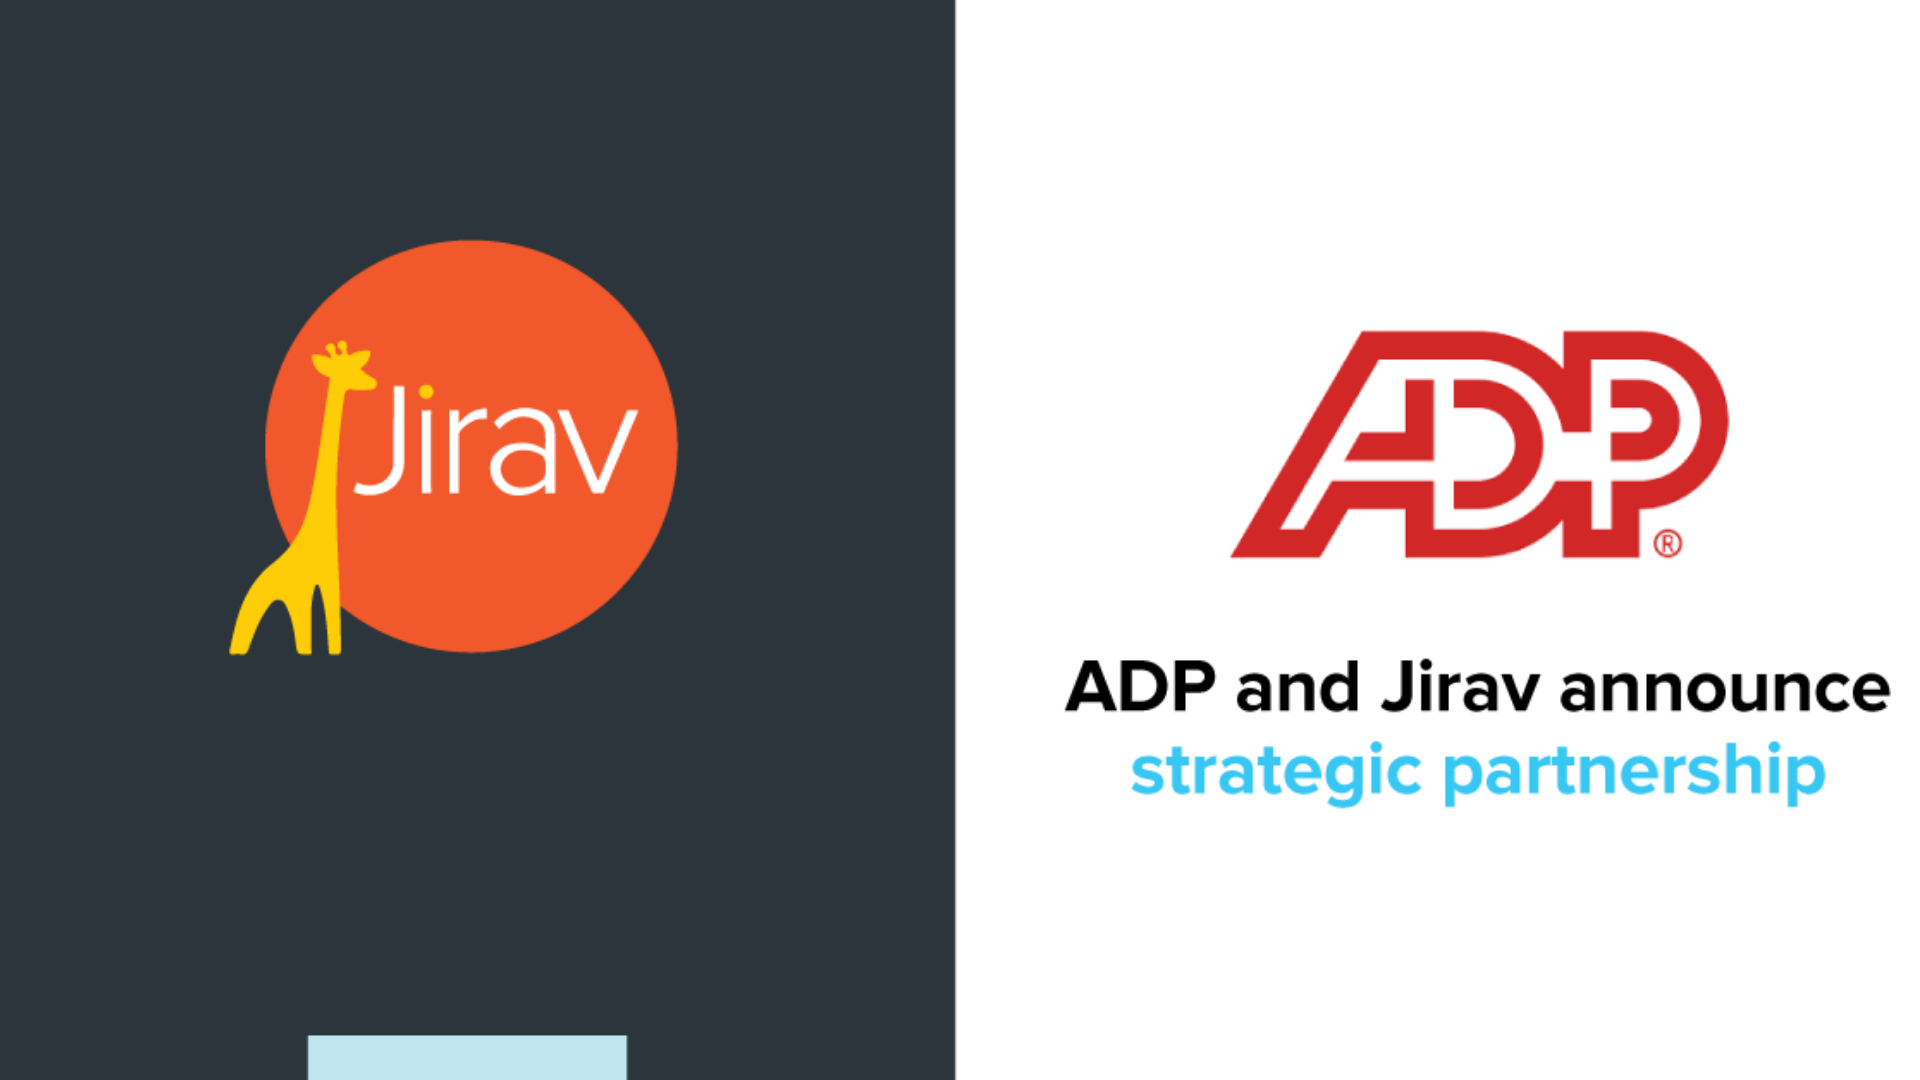 Jirav now integrates with ADP® to help equip accounting firms with powerful and efficient FP&A advisory services